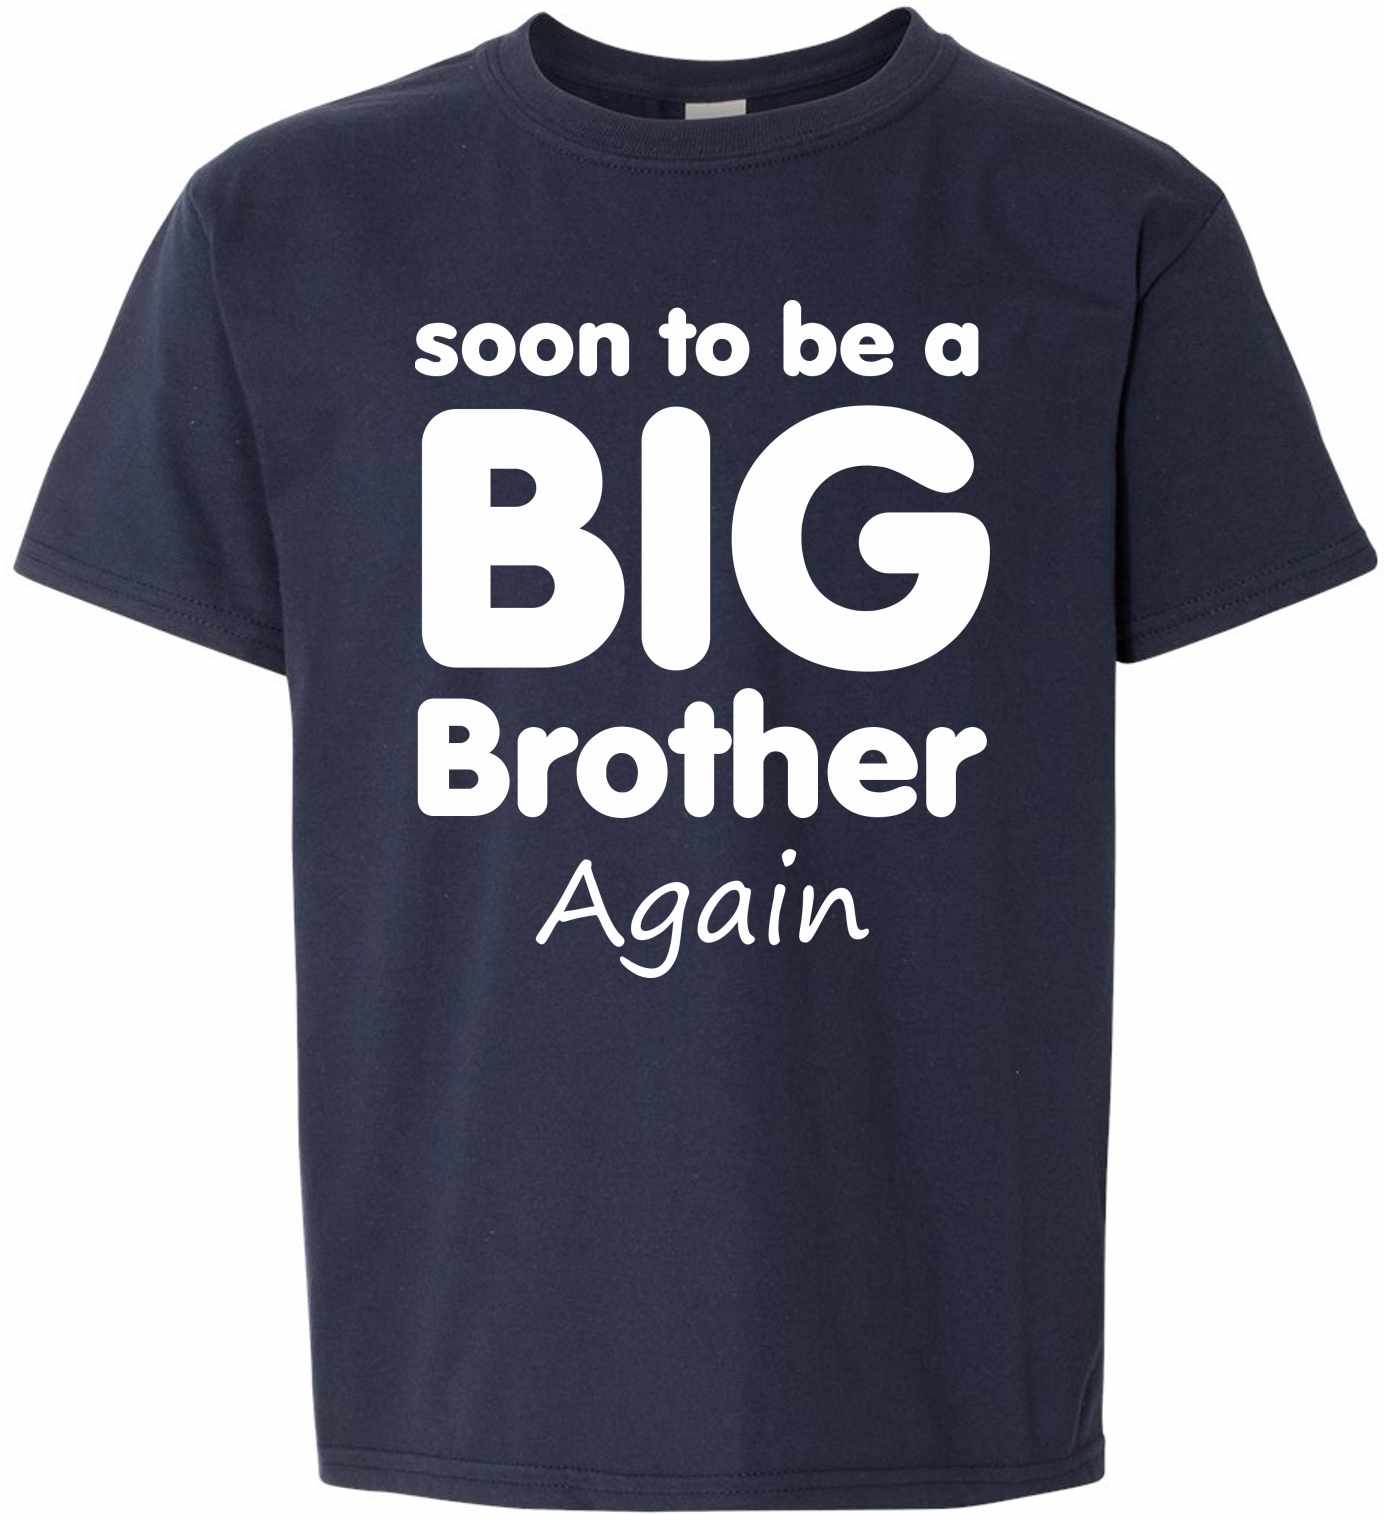 Soon To Be Big Brother Again on Kids T-Shirt (#1285-201)